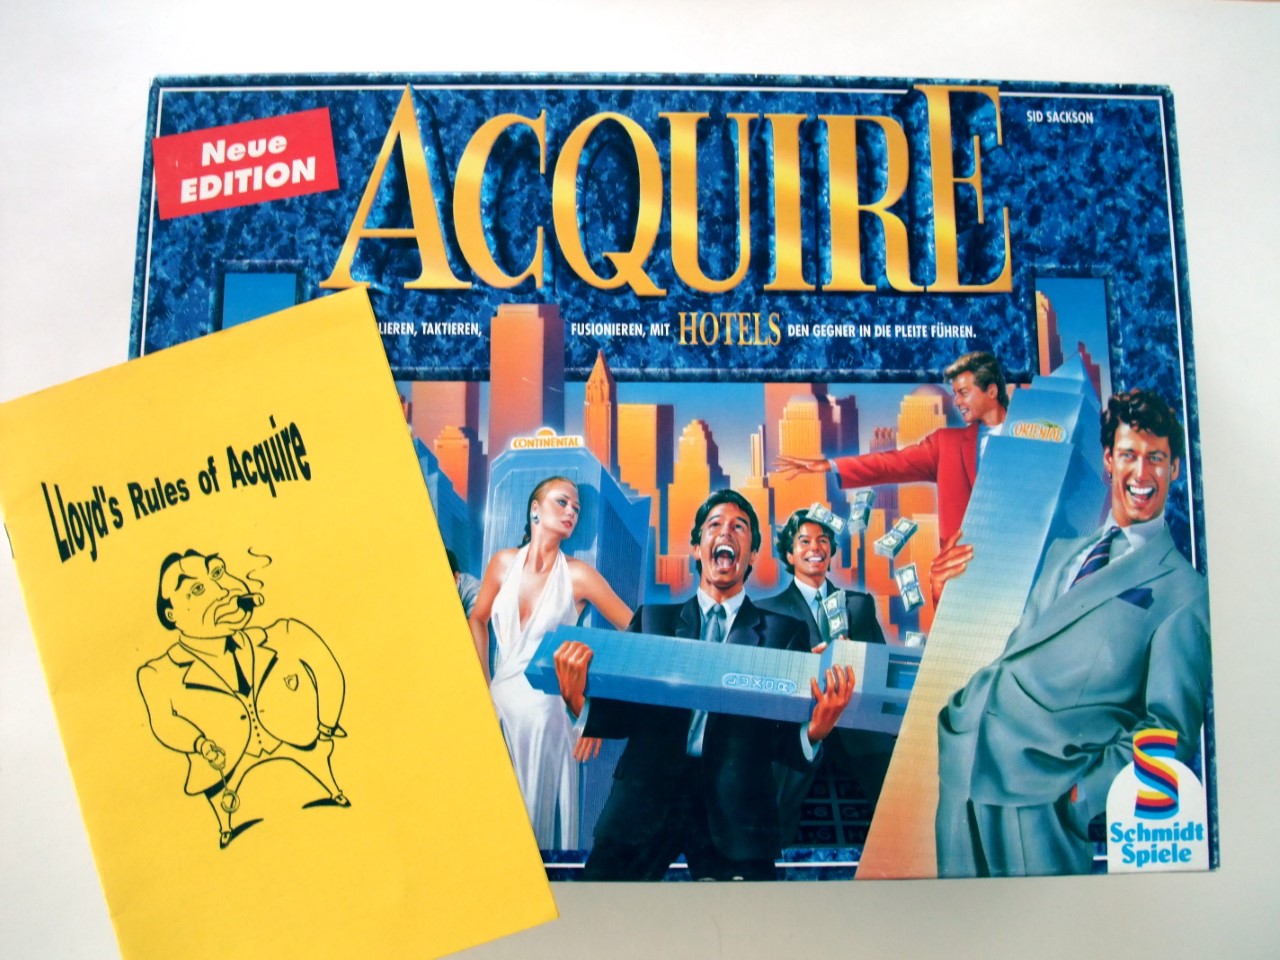 1997 ACQUIRE with Lloyd's Rules of ACQUIRE (Photo courtesy of Felix Schellenberg)